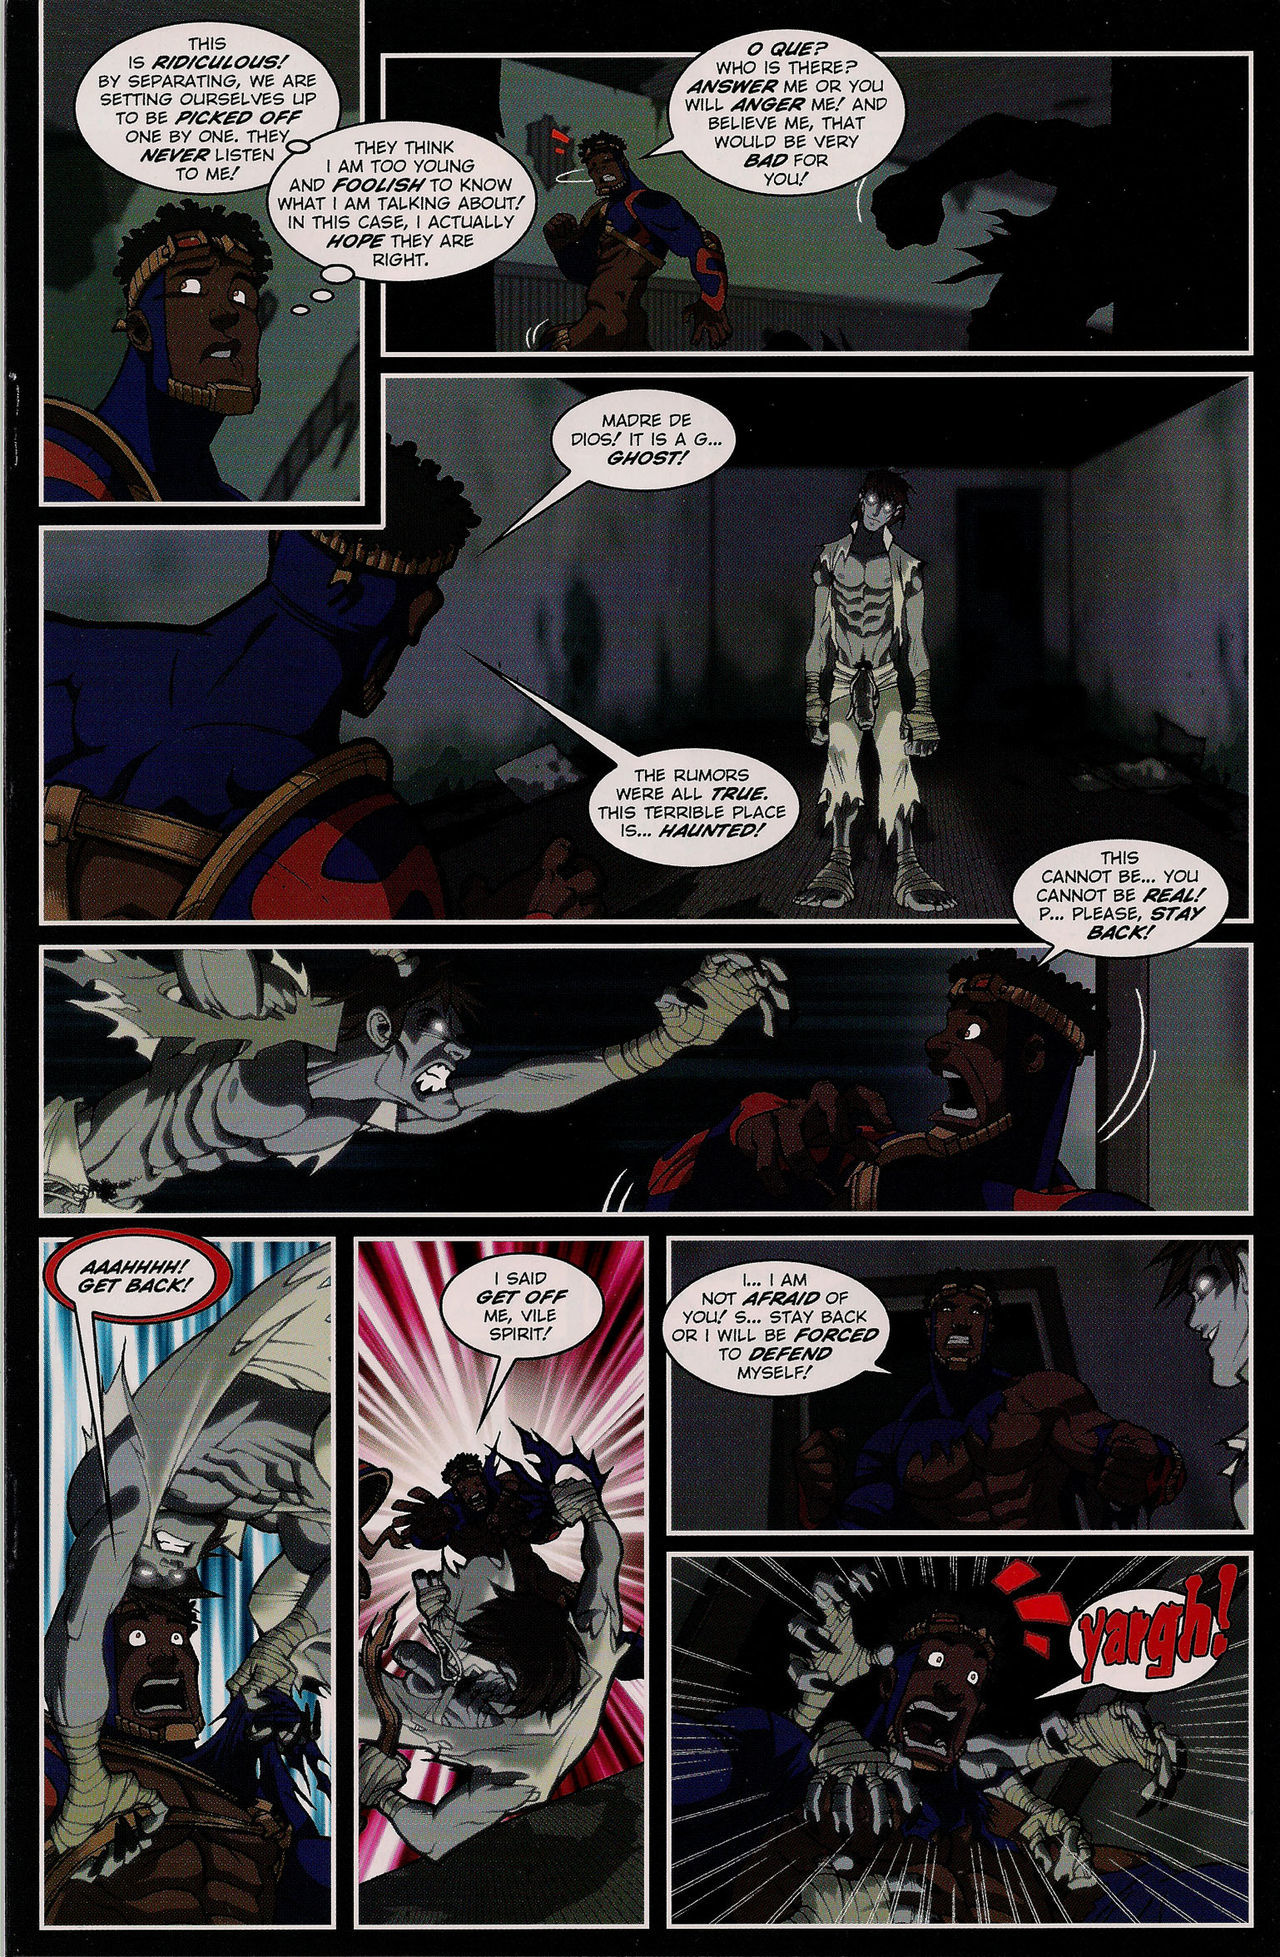 Naked Justice Beginnings 2 (Patrick Fillion) page 21